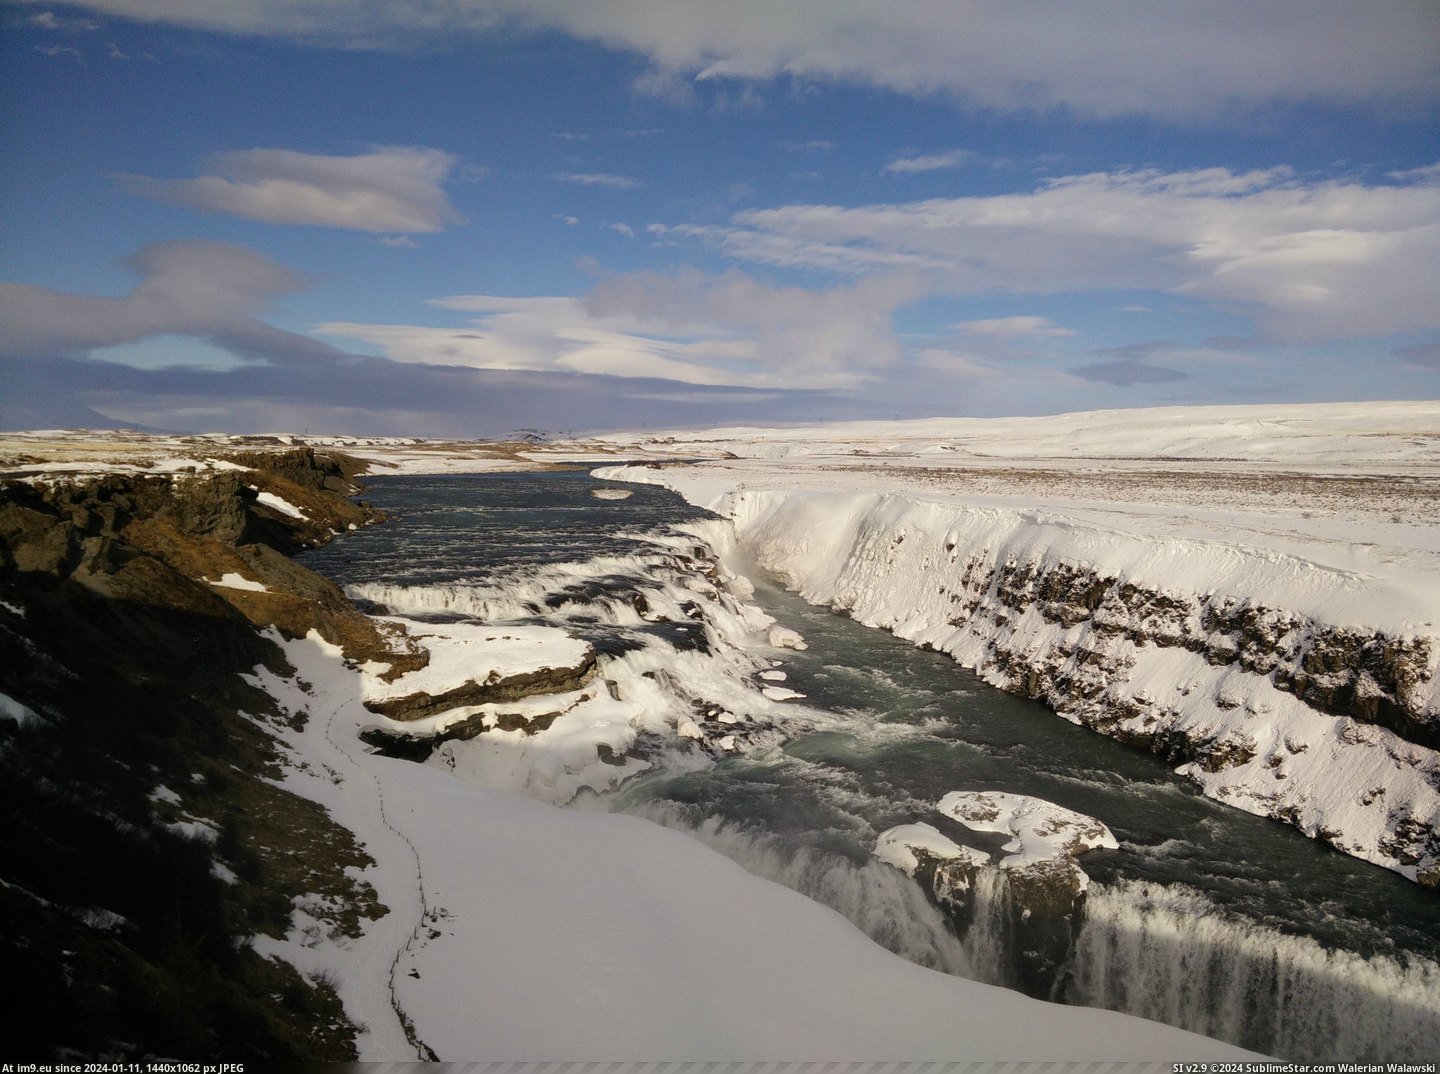 #Snow #Iceland #March #Gullfoss #Covered #Waterfall [Earthporn] Snow covered Gullfoss Waterfall, Iceland, in March 2015.  [3156x2340] Pic. (Bild von album My r/EARTHPORN favs))